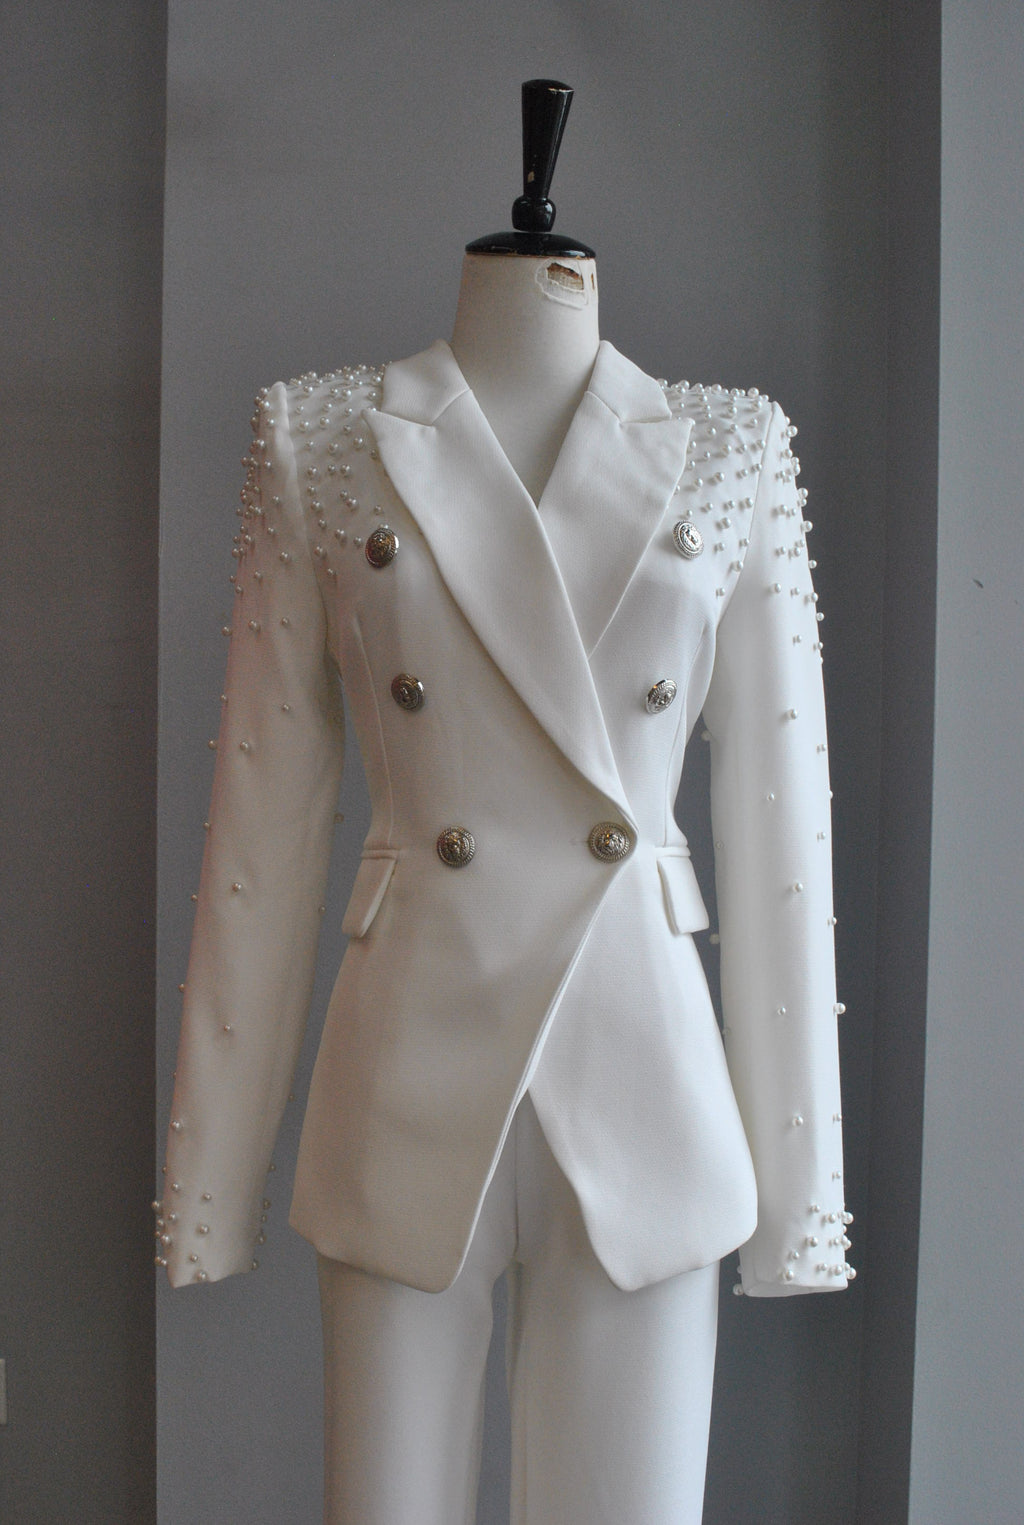 WHITE SUIT WITH FIT SKINNY PANTS AND PEARLS - SILVER FINISH